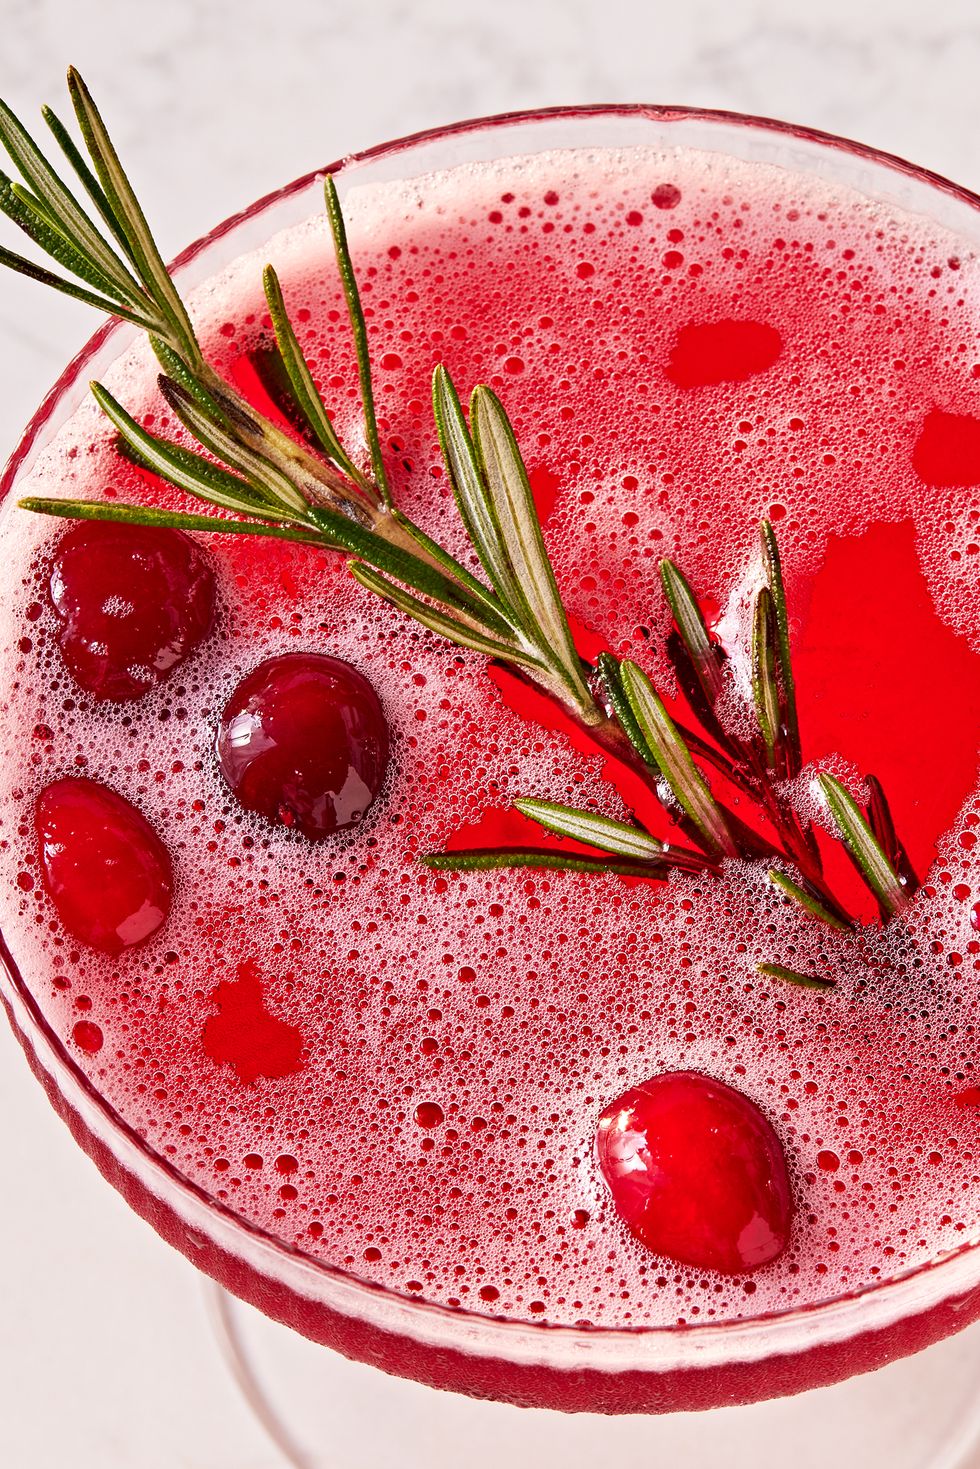 30+ Christmas Cocktails - Must-Try Recipes for the Holidays